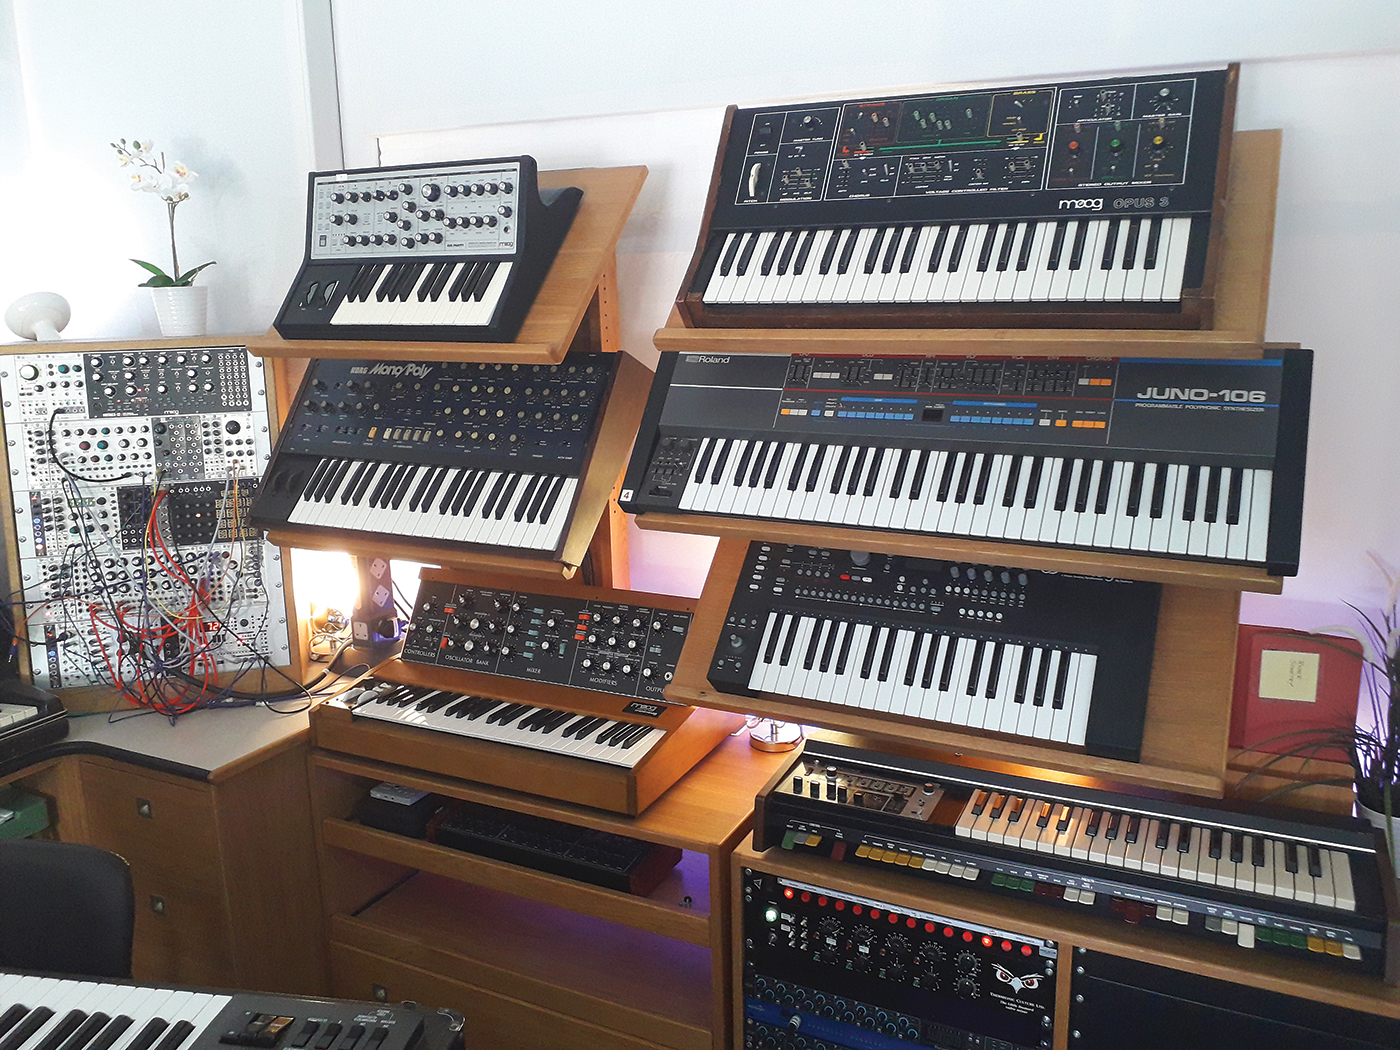 Michael Price, modern and vintage synth